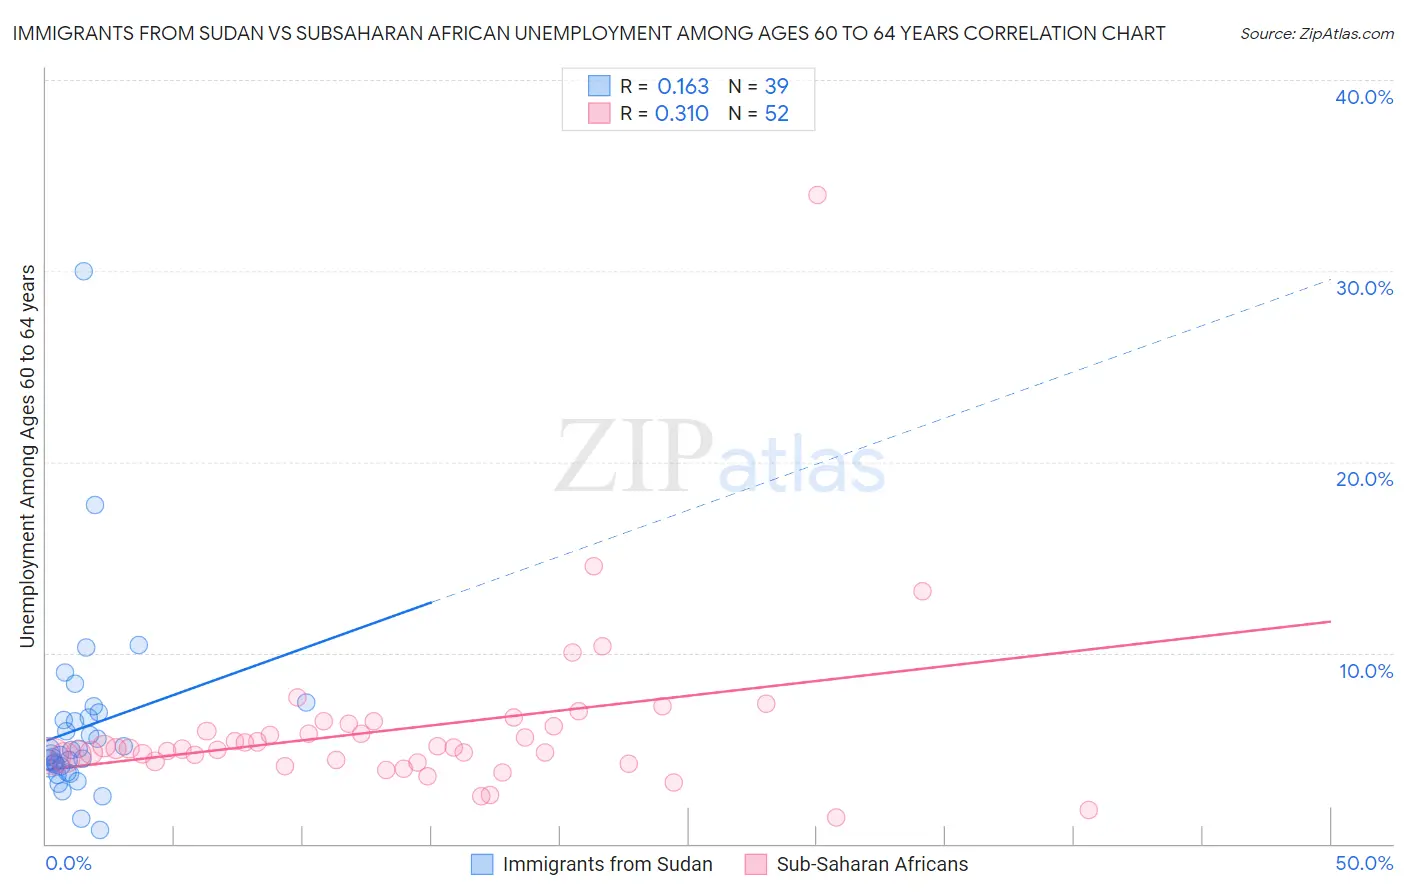 Immigrants from Sudan vs Subsaharan African Unemployment Among Ages 60 to 64 years